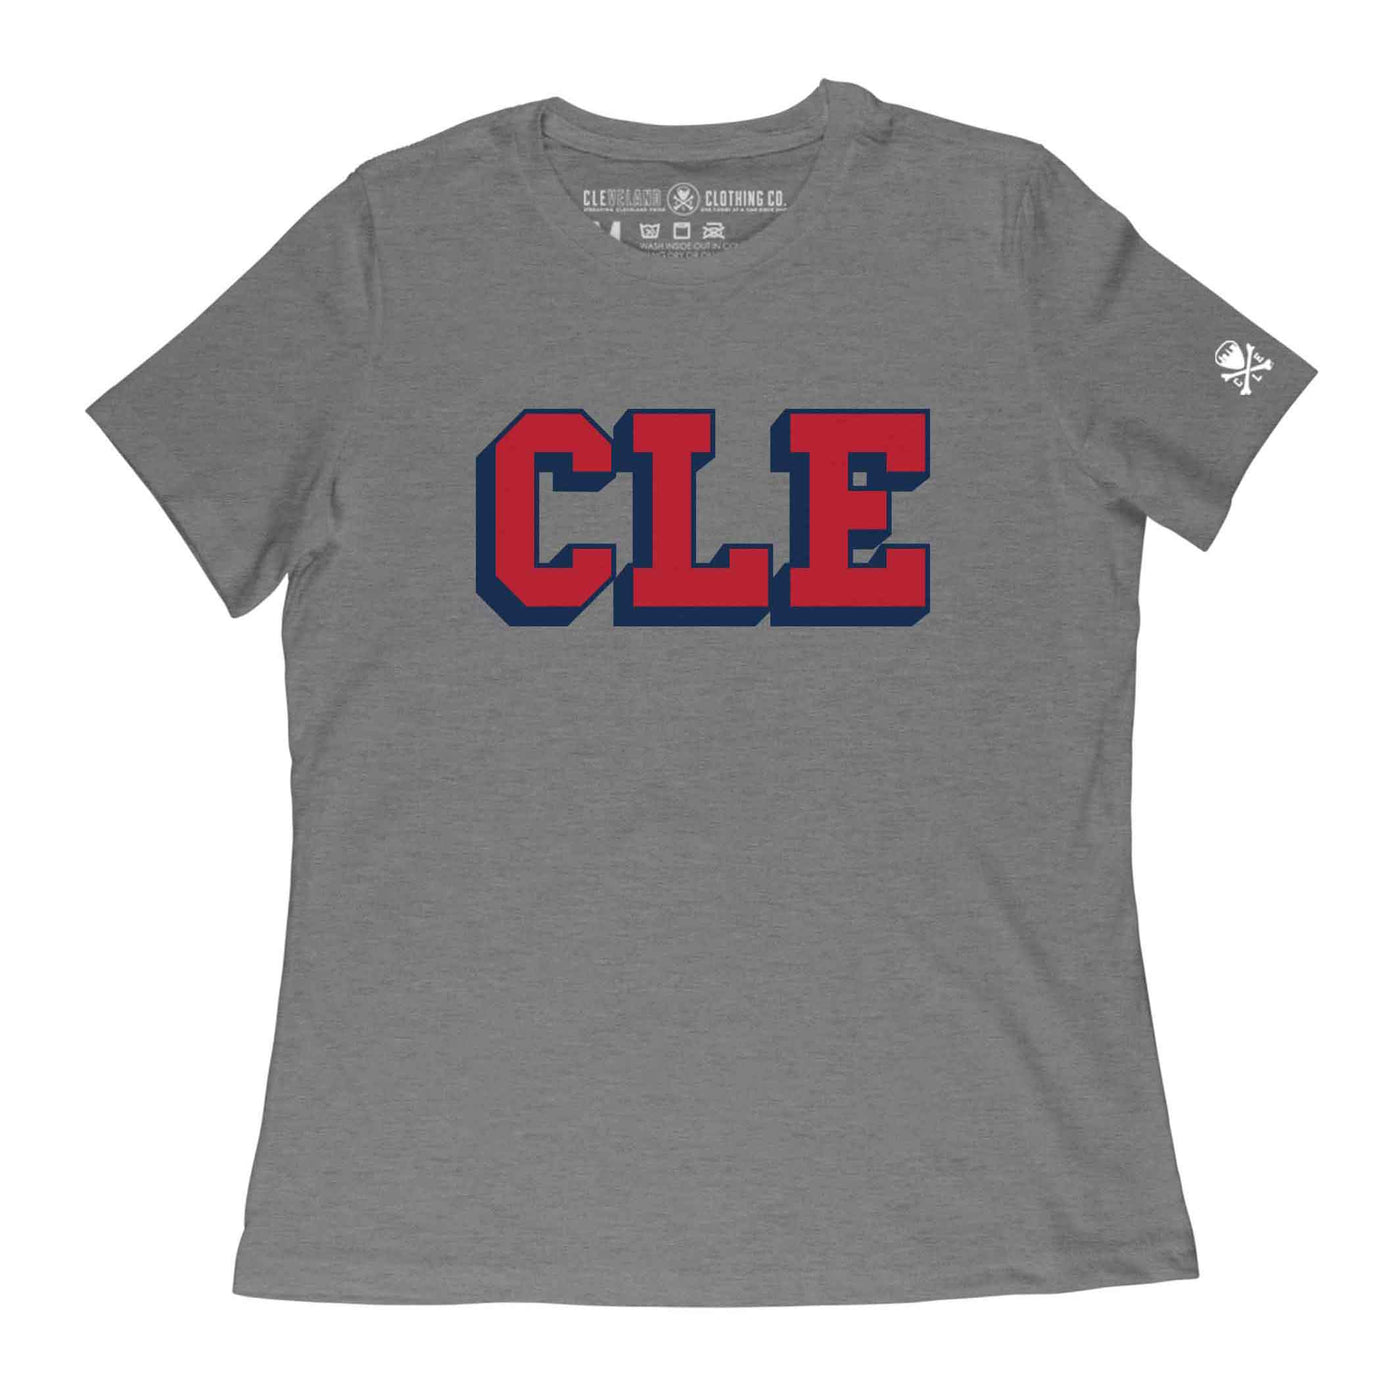 CLE College - Navy/Red - Womens Relaxed Fit Crew T-Shirt